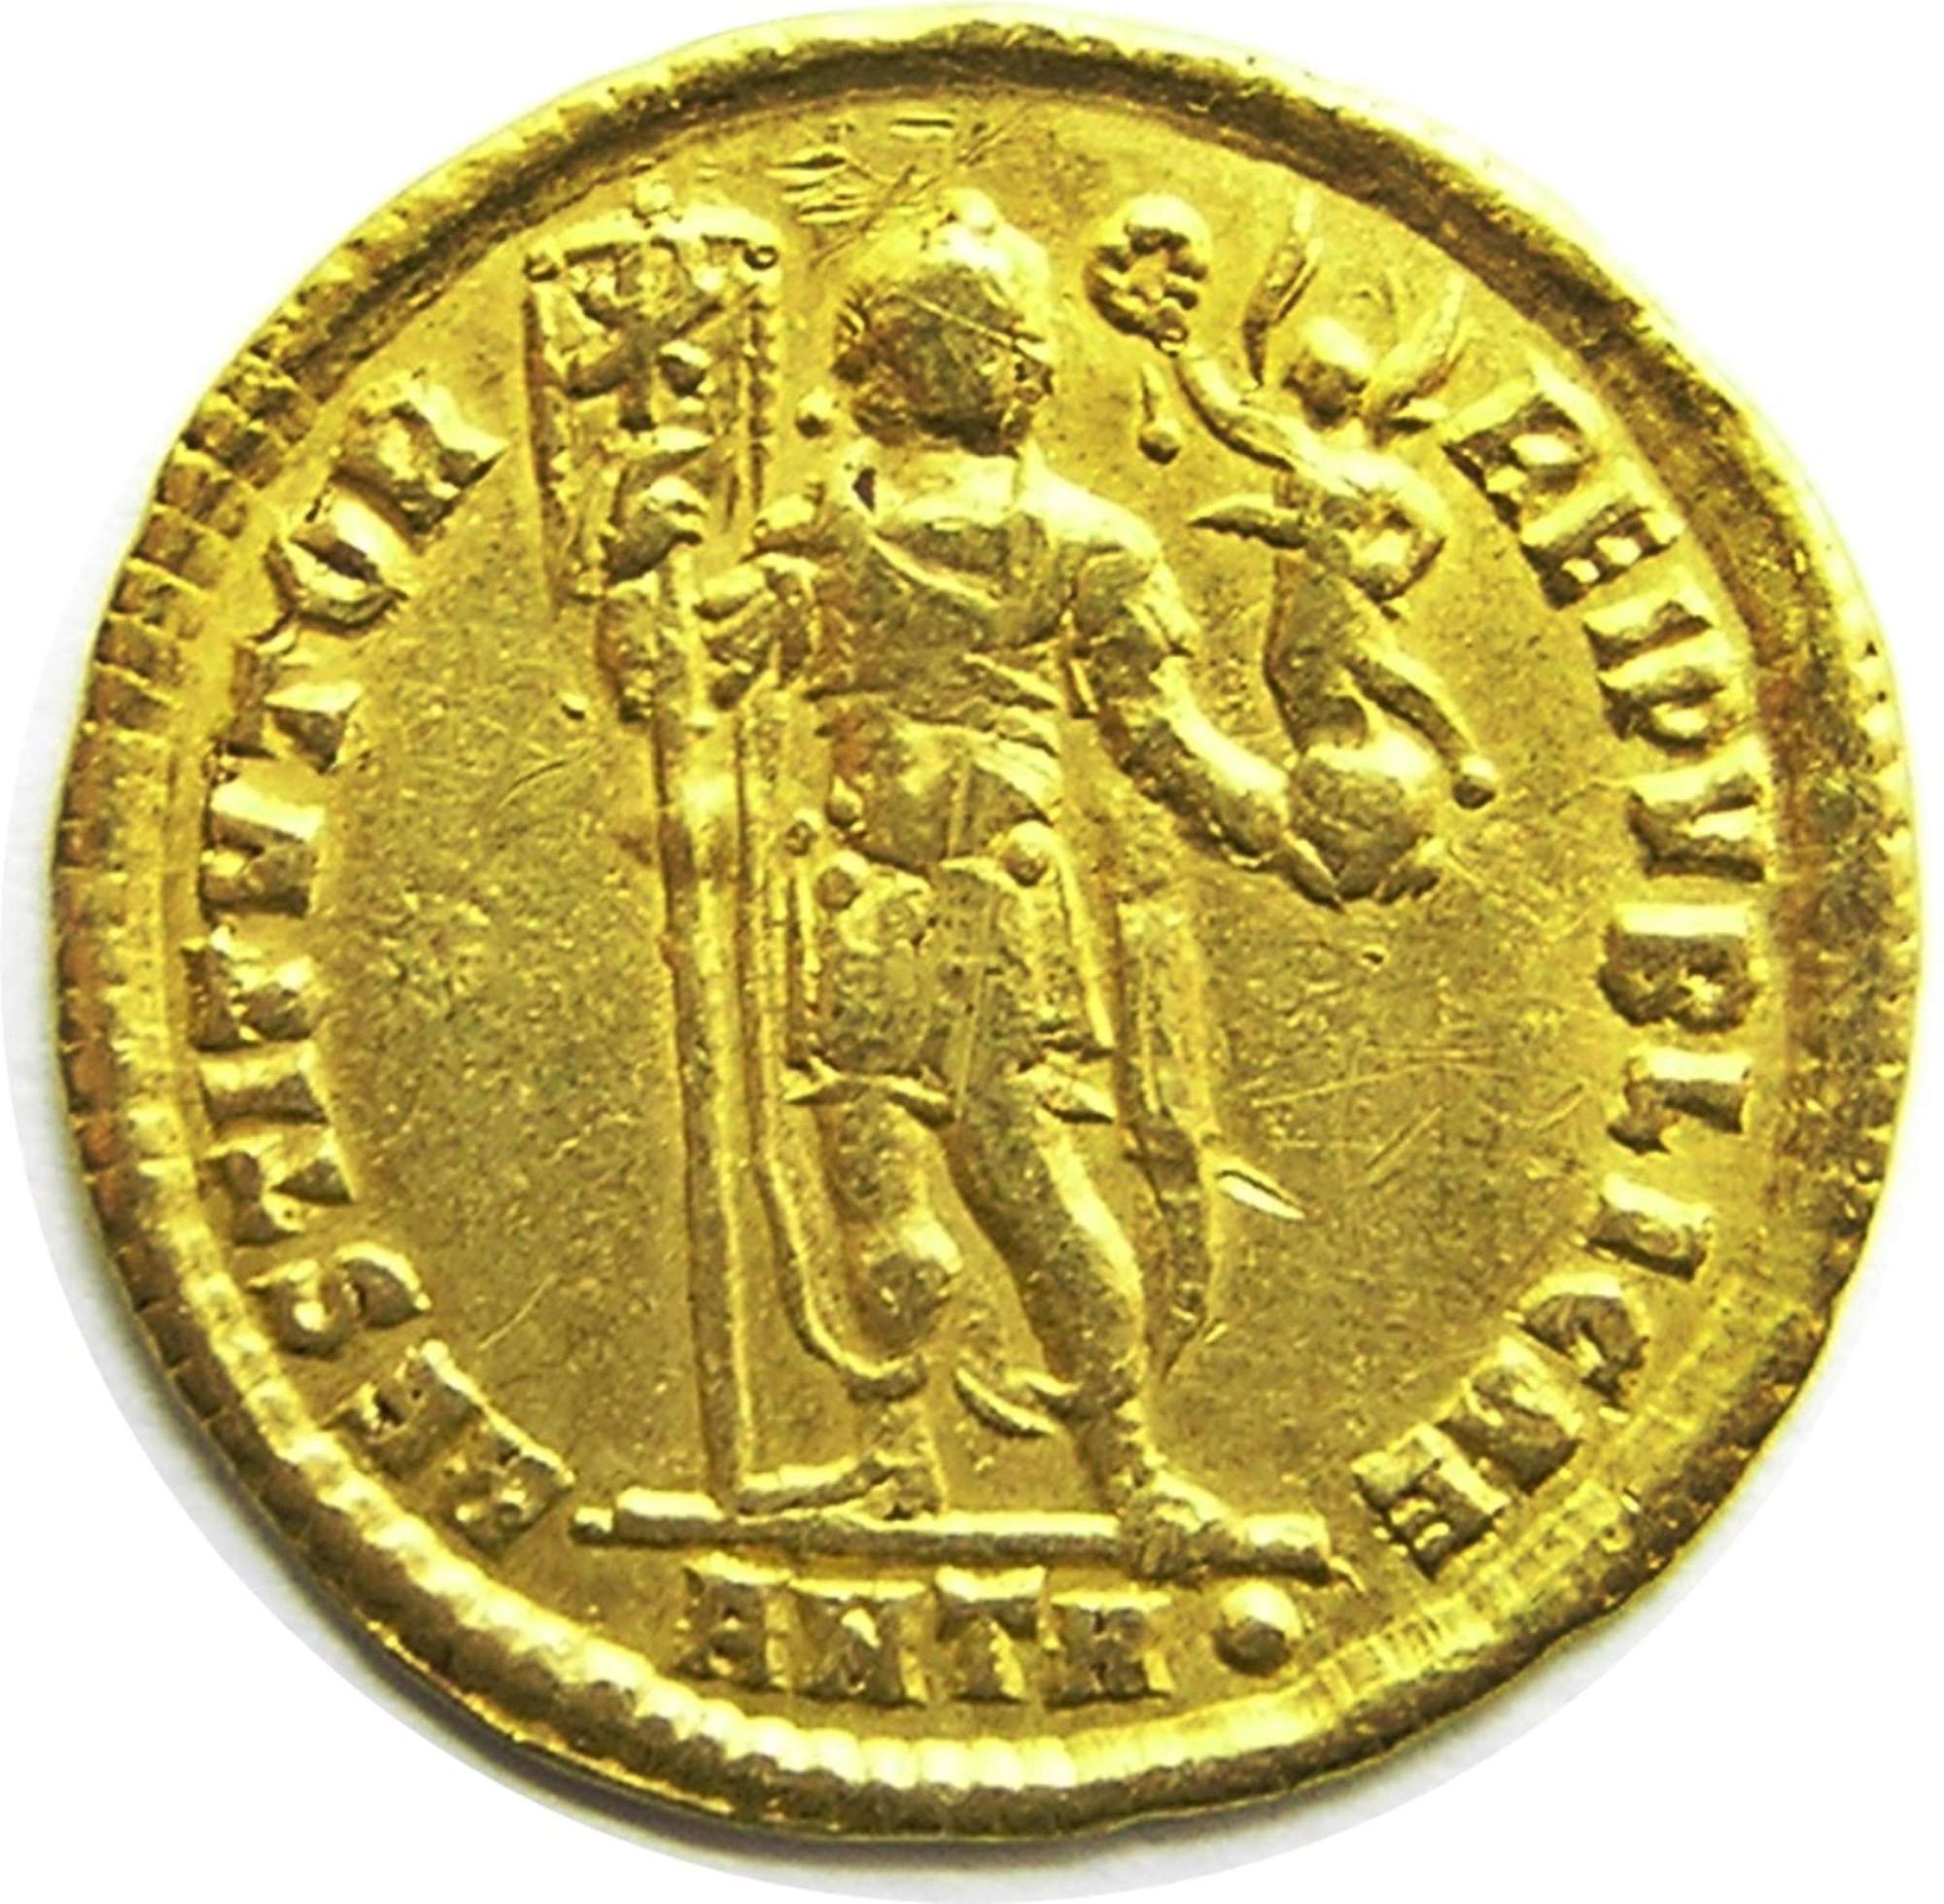 Roman Gold Solidus of Emperor Valentinian minted in Antioch